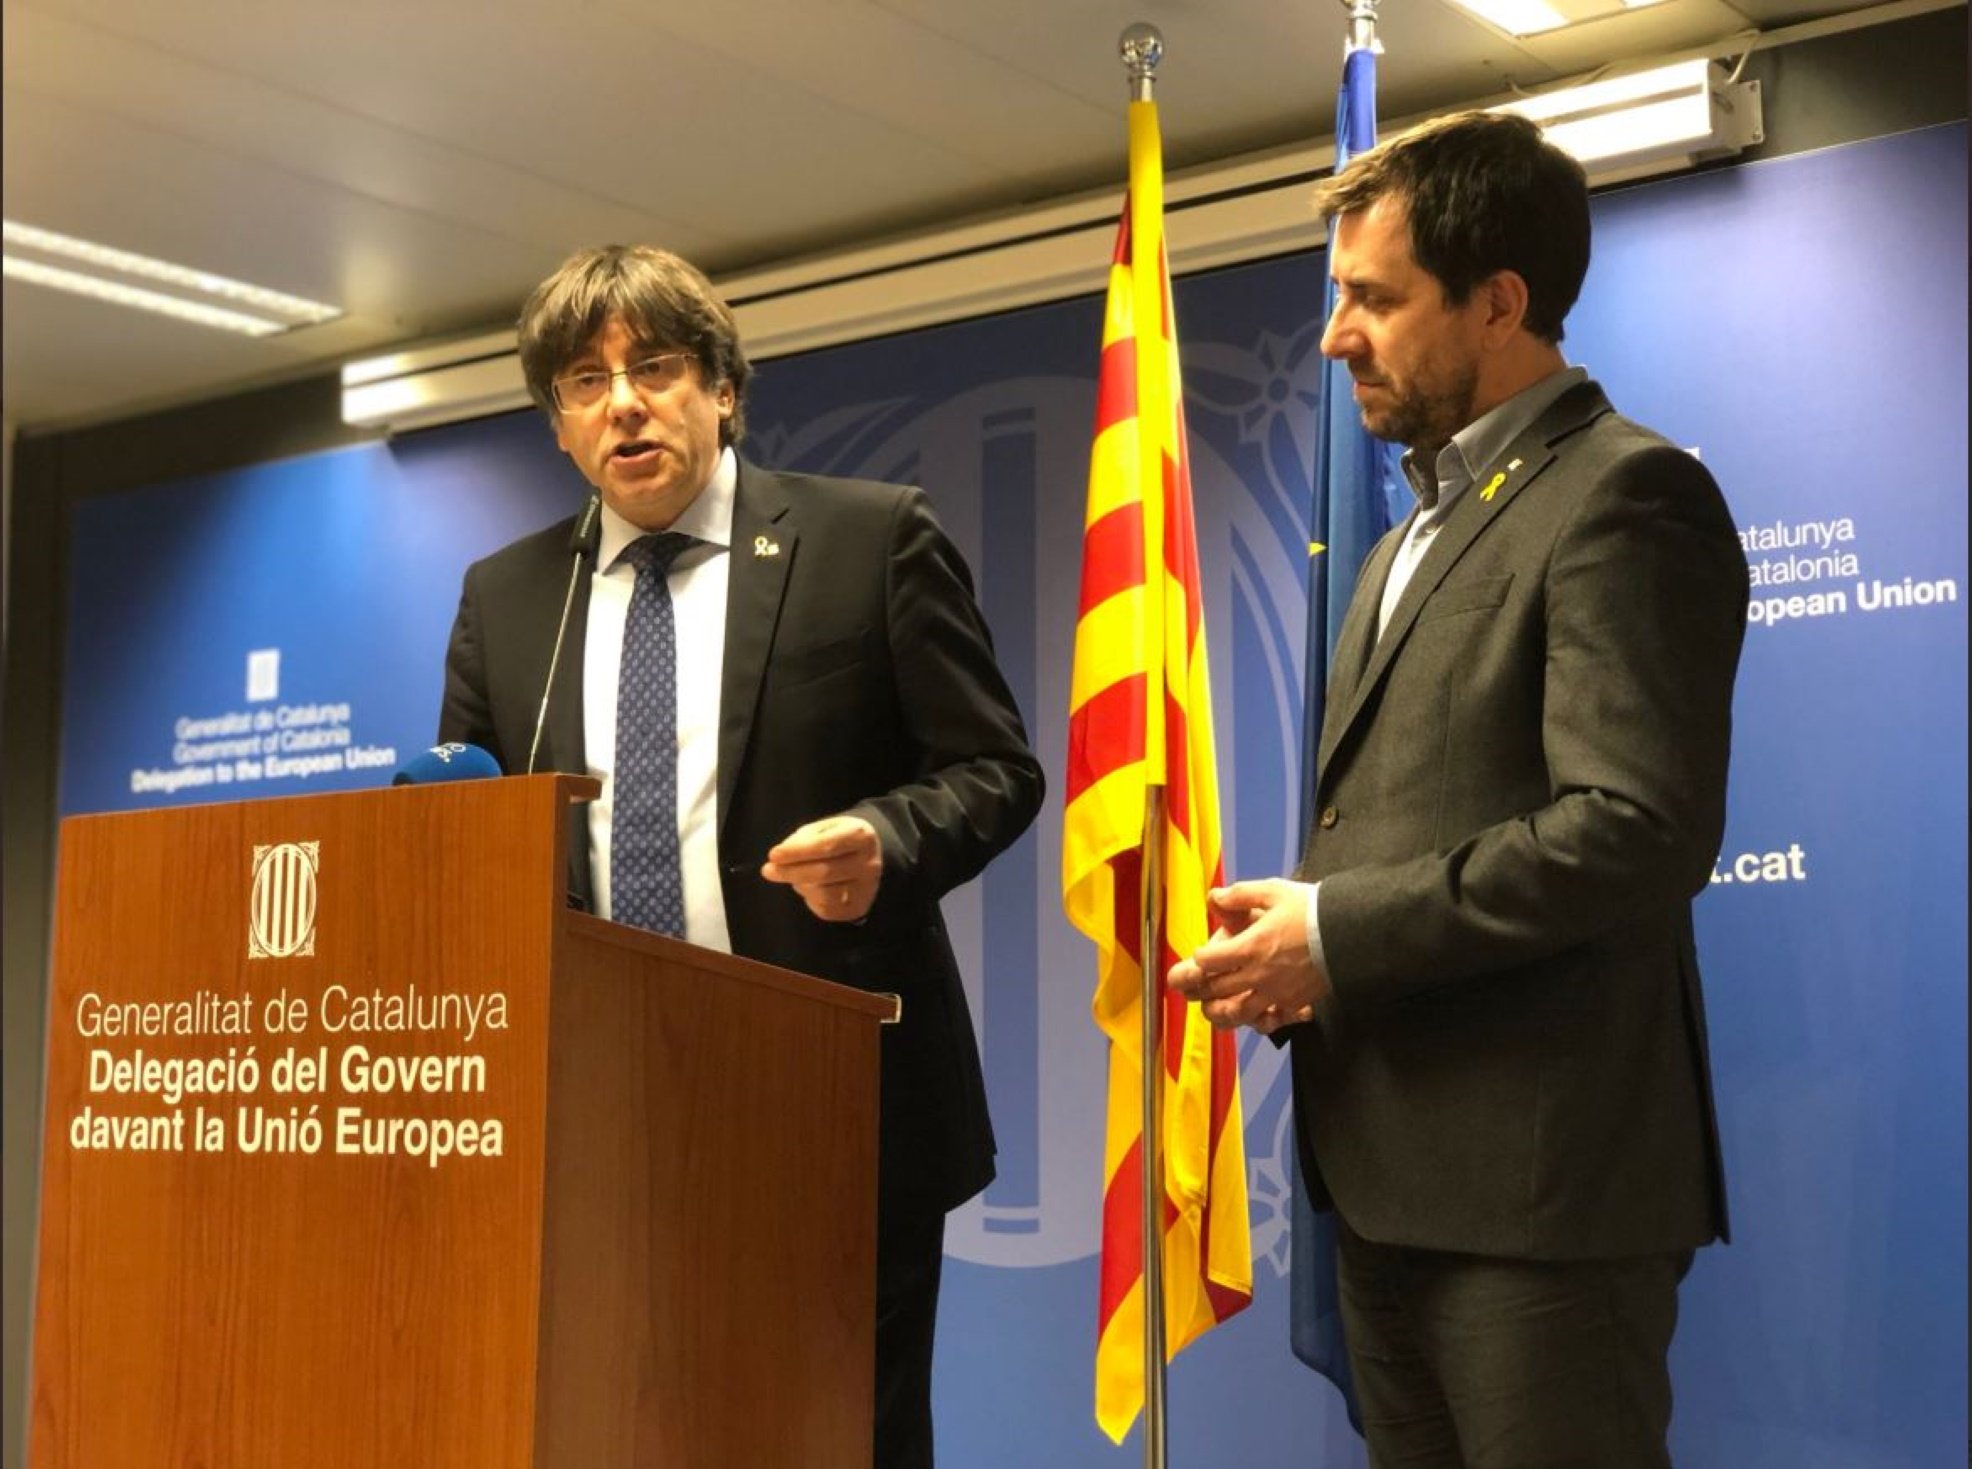 Puigdemont calls for Junqueras's release, investigation into Spanish courts' "malpractice"